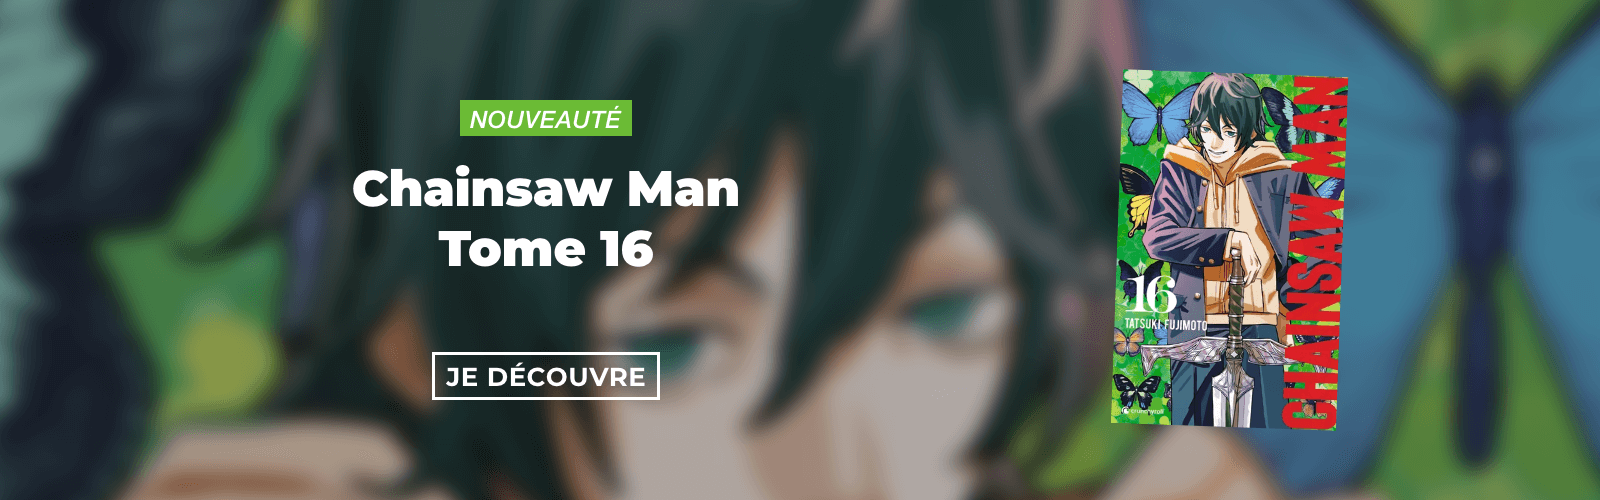 Chainsaw Man Tome 16